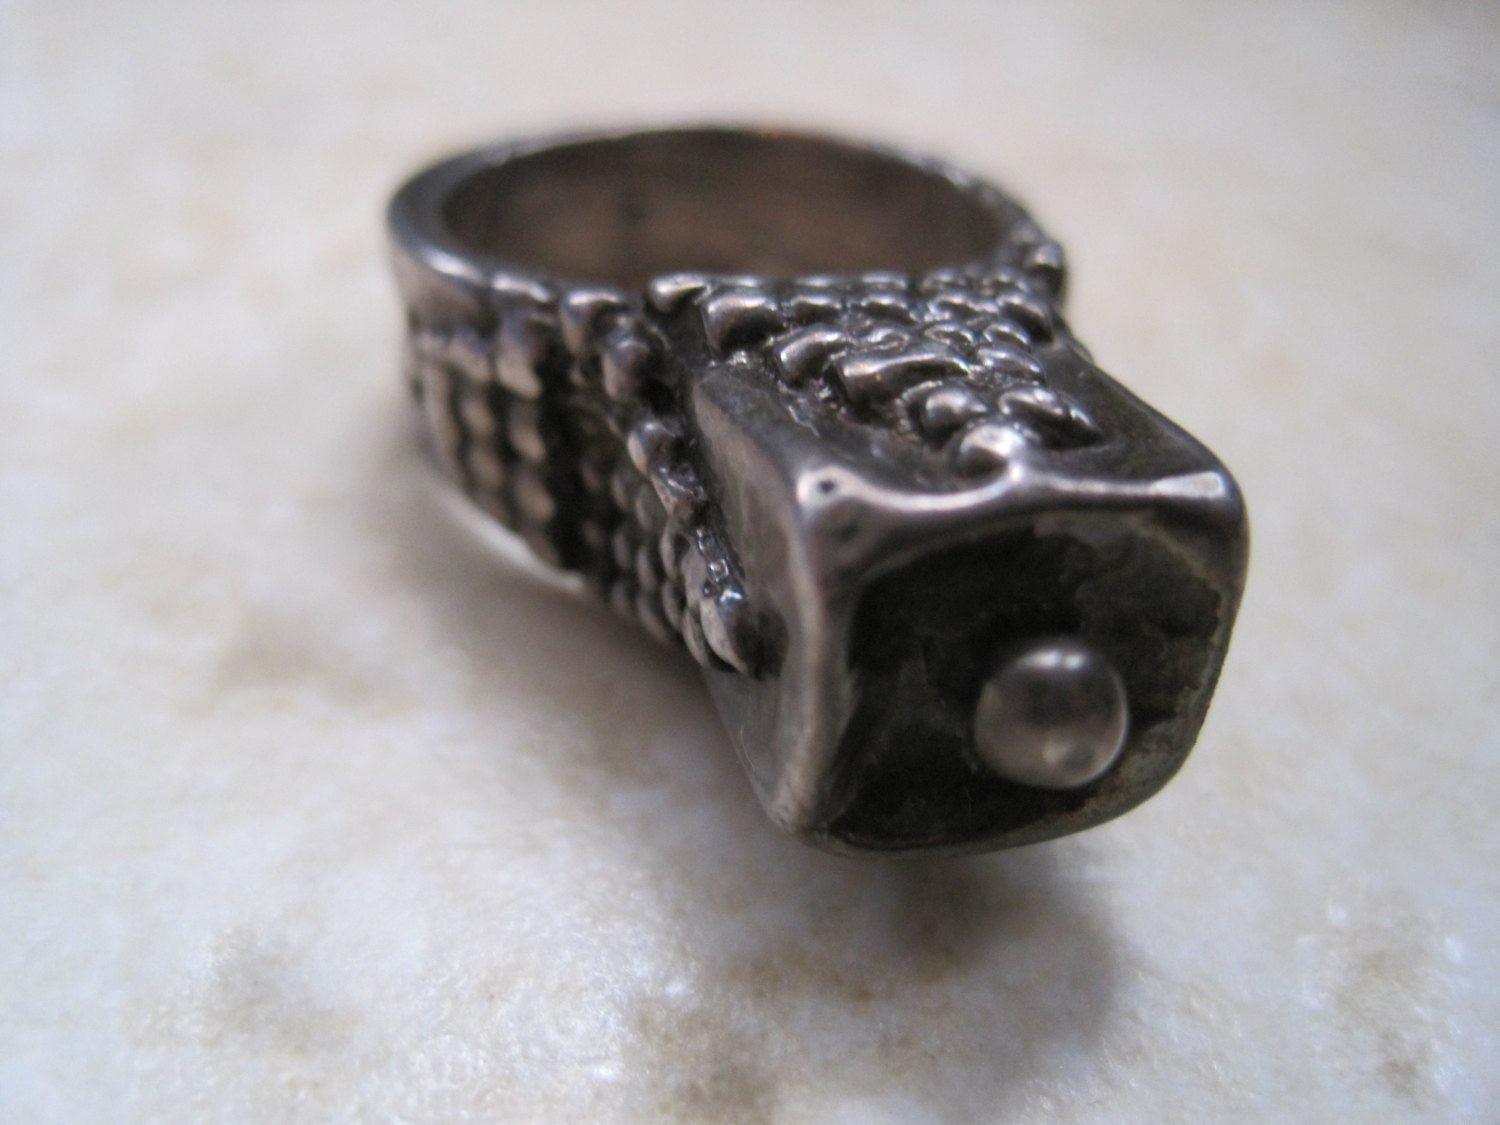 Vintage Bedouin Ring - Tribal Silver Plated Tower Ring - Size 8 - Anteeka